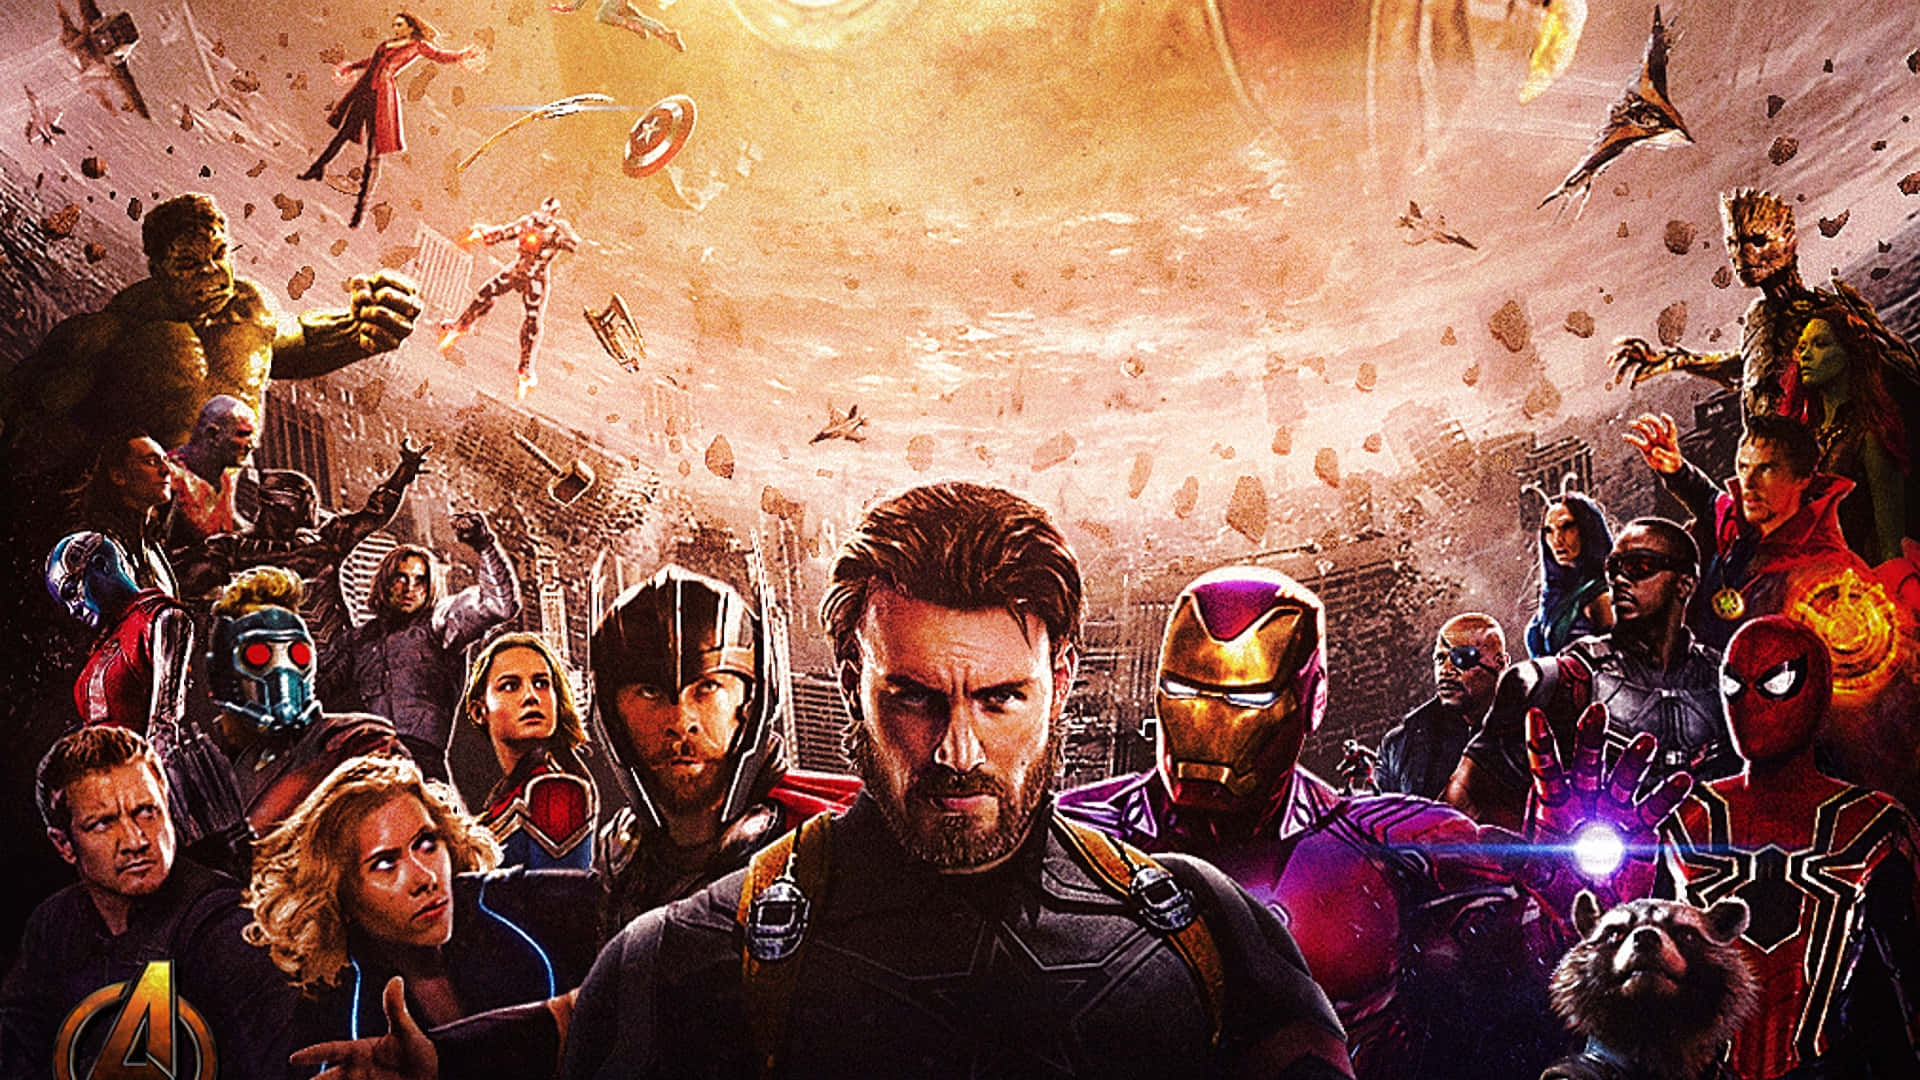 The Avengers Battle It Out Together Wallpaper